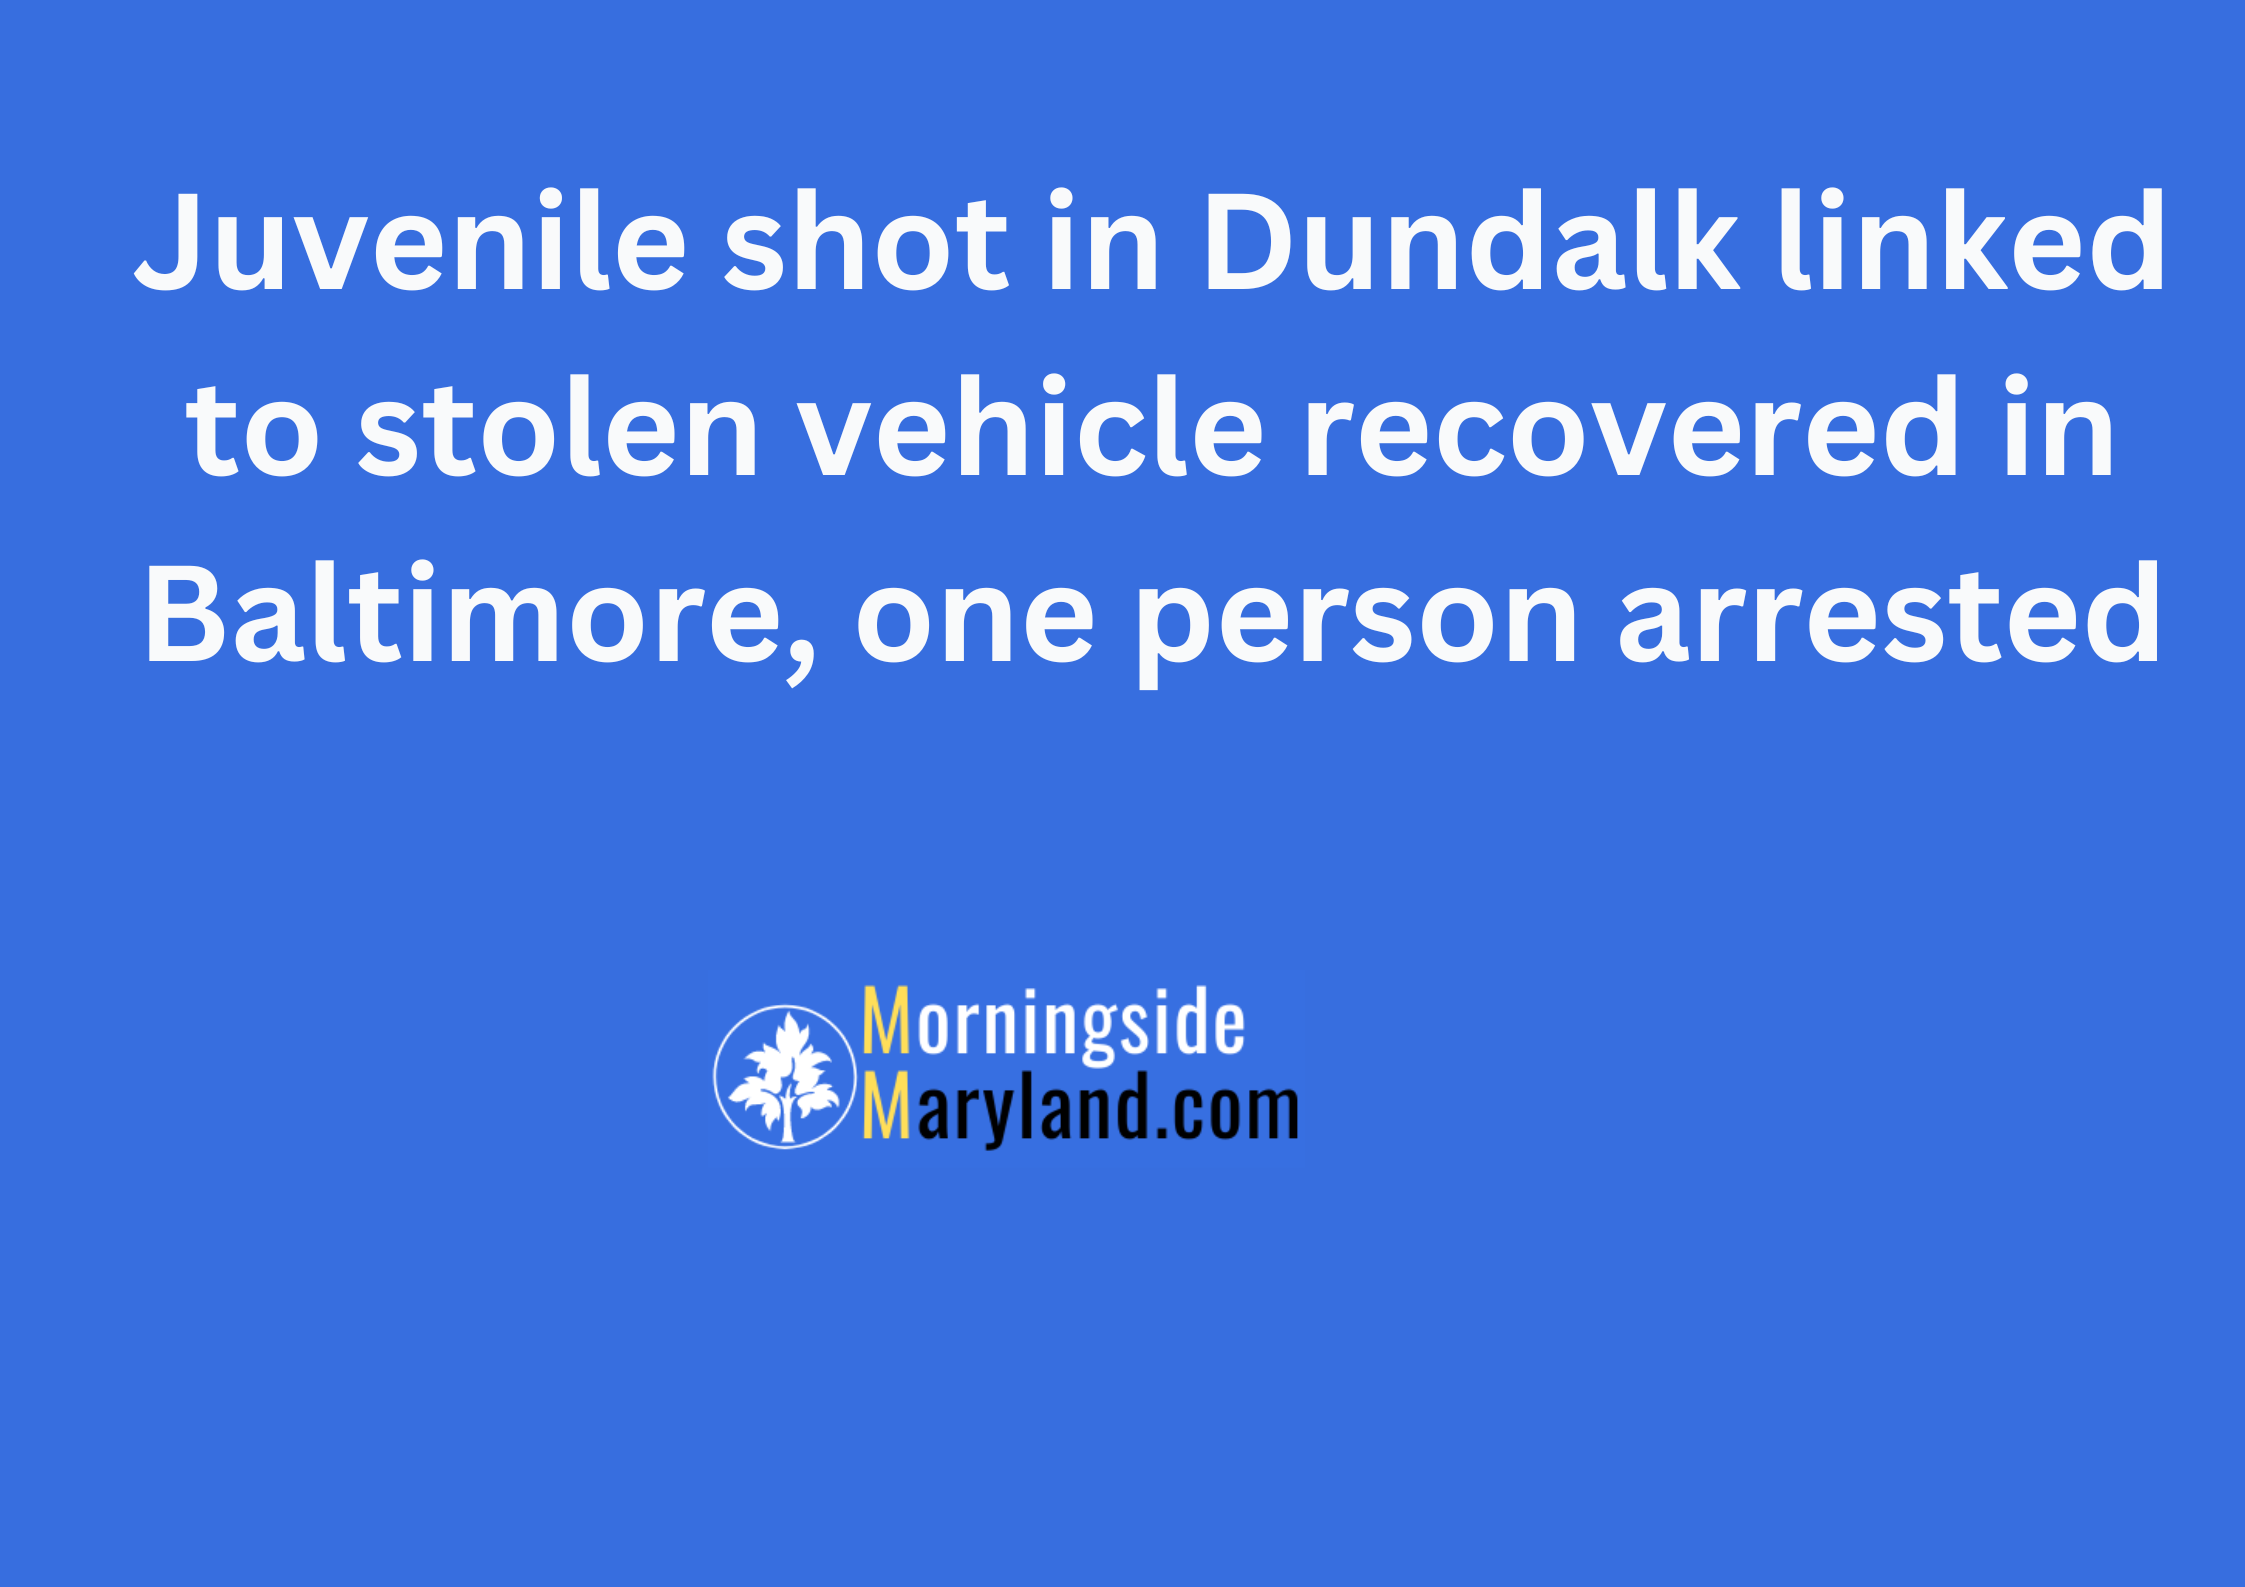 Juvenile shot in Dundalk linked to stolen vehicle recovered in Baltimore, one person arrested